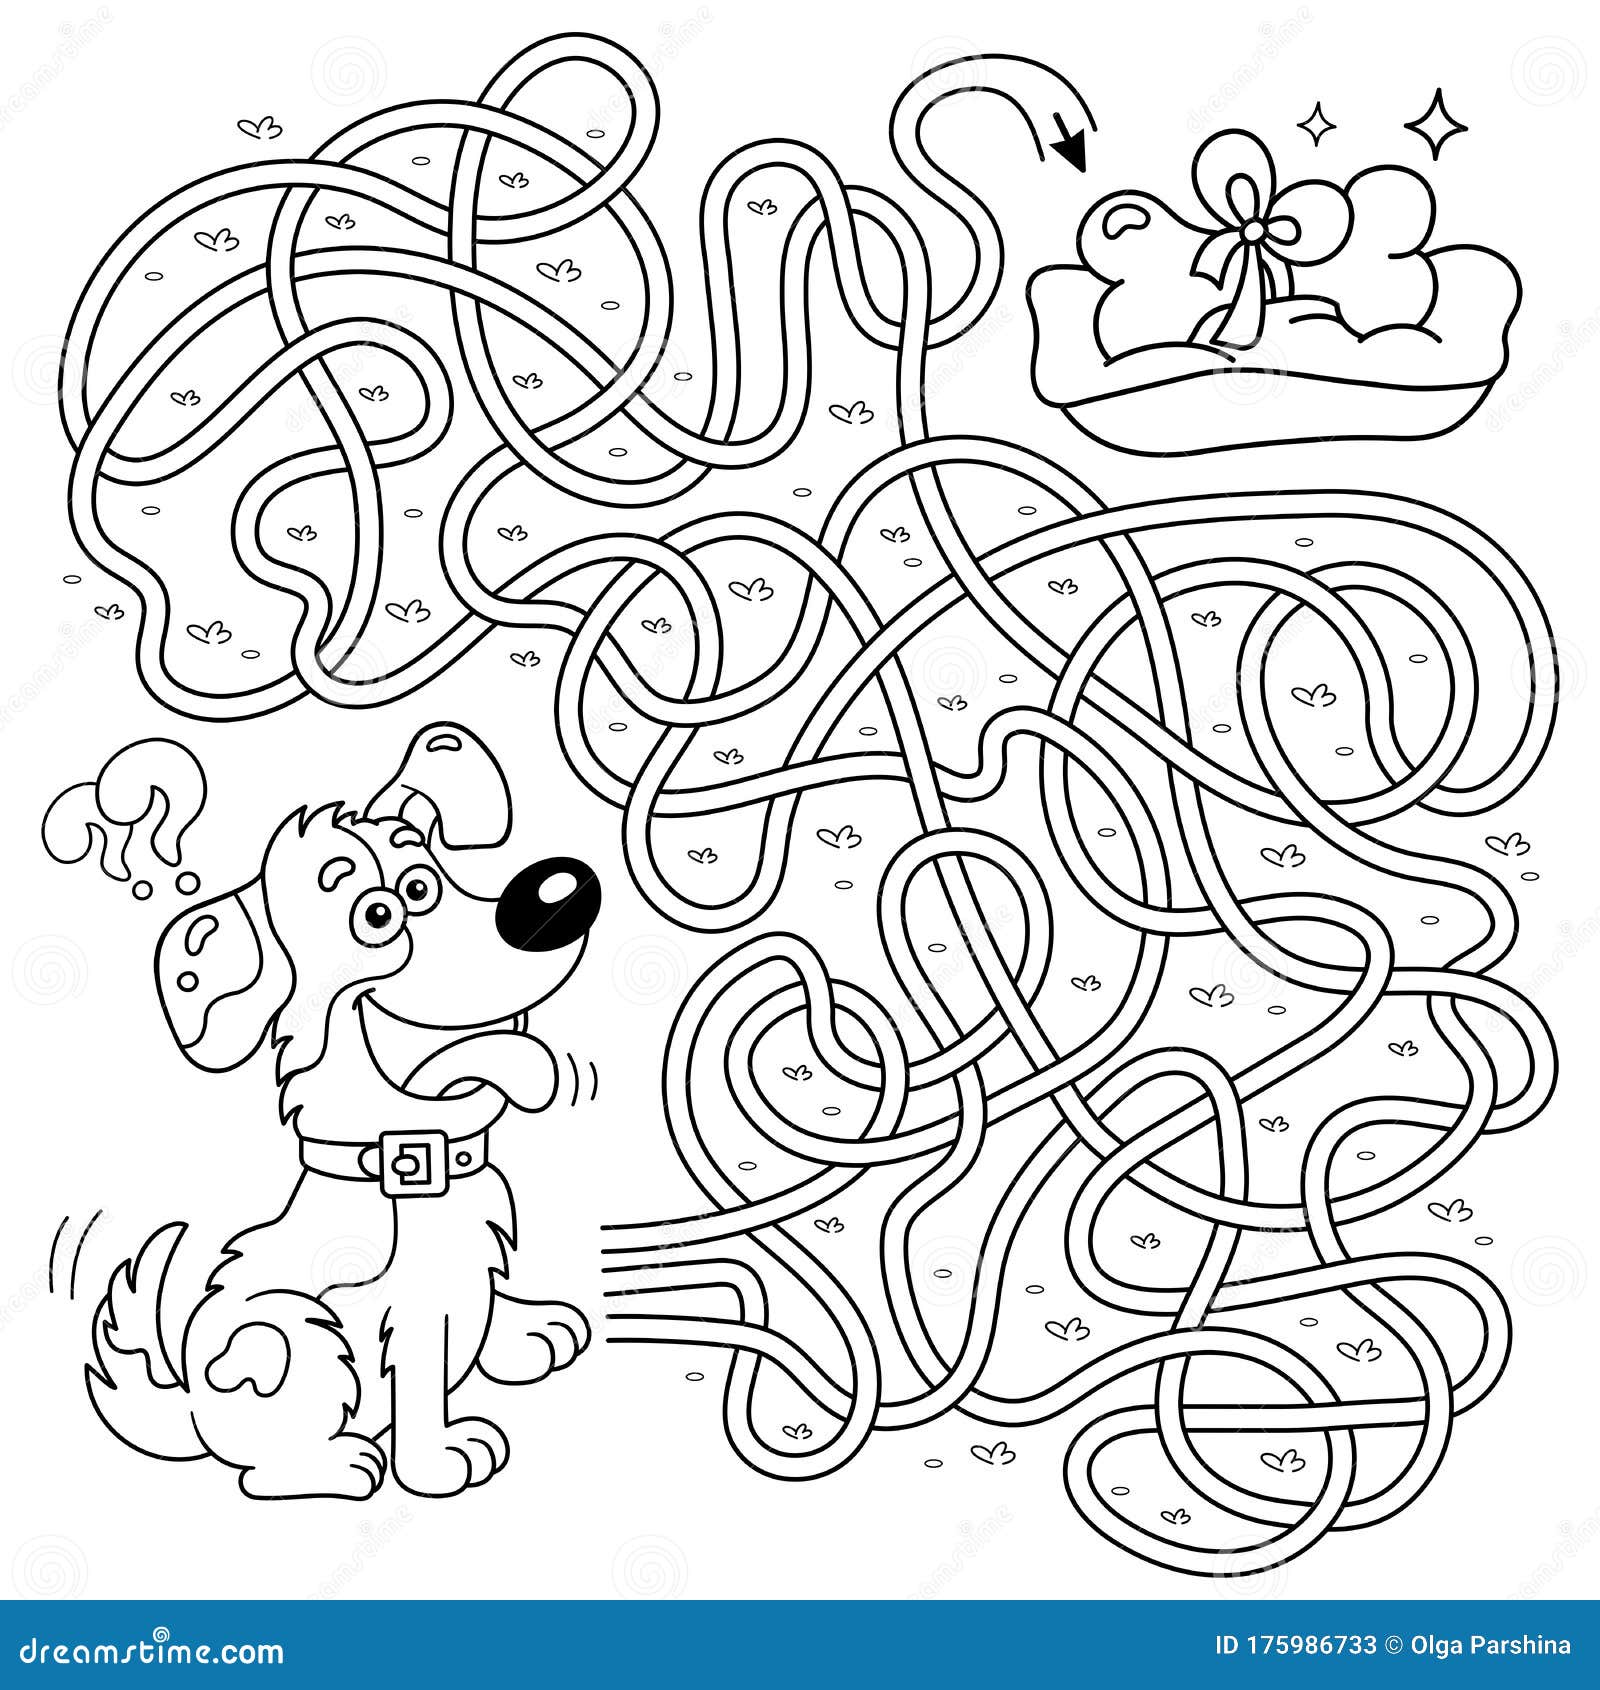 Maze or labyrinth game for preschool children puzzle tangled road matching game stock vector